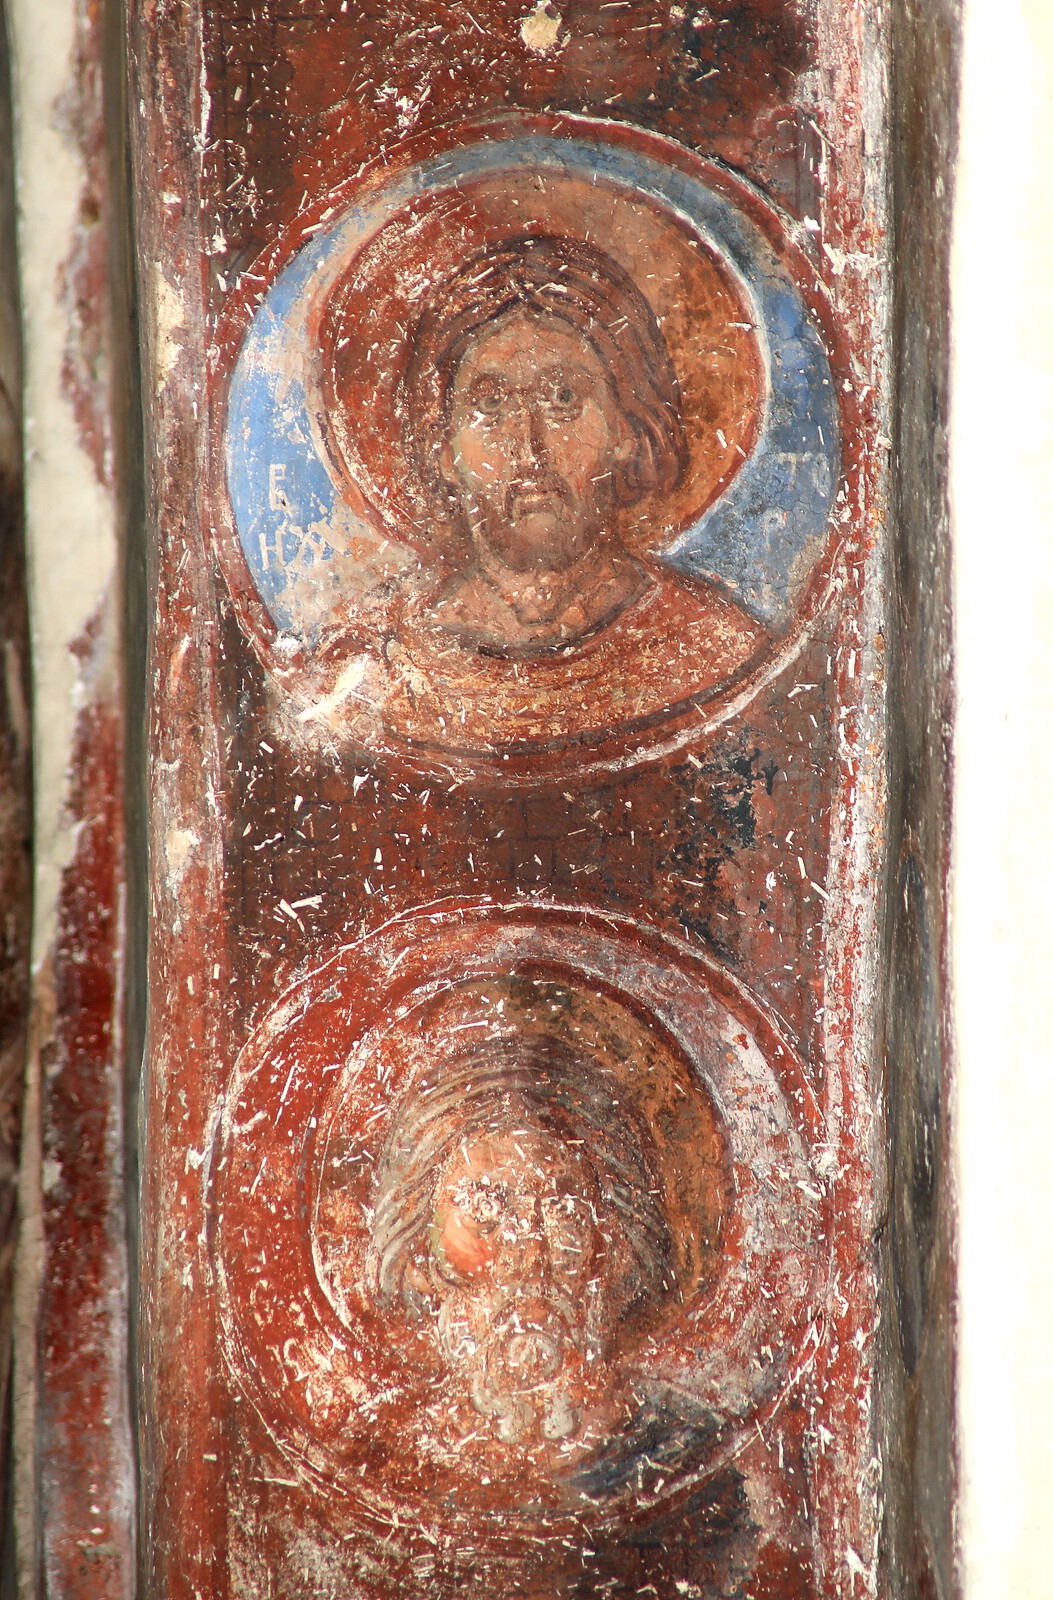 Holy martyr Victor and unidentified martyr-saint in medallions